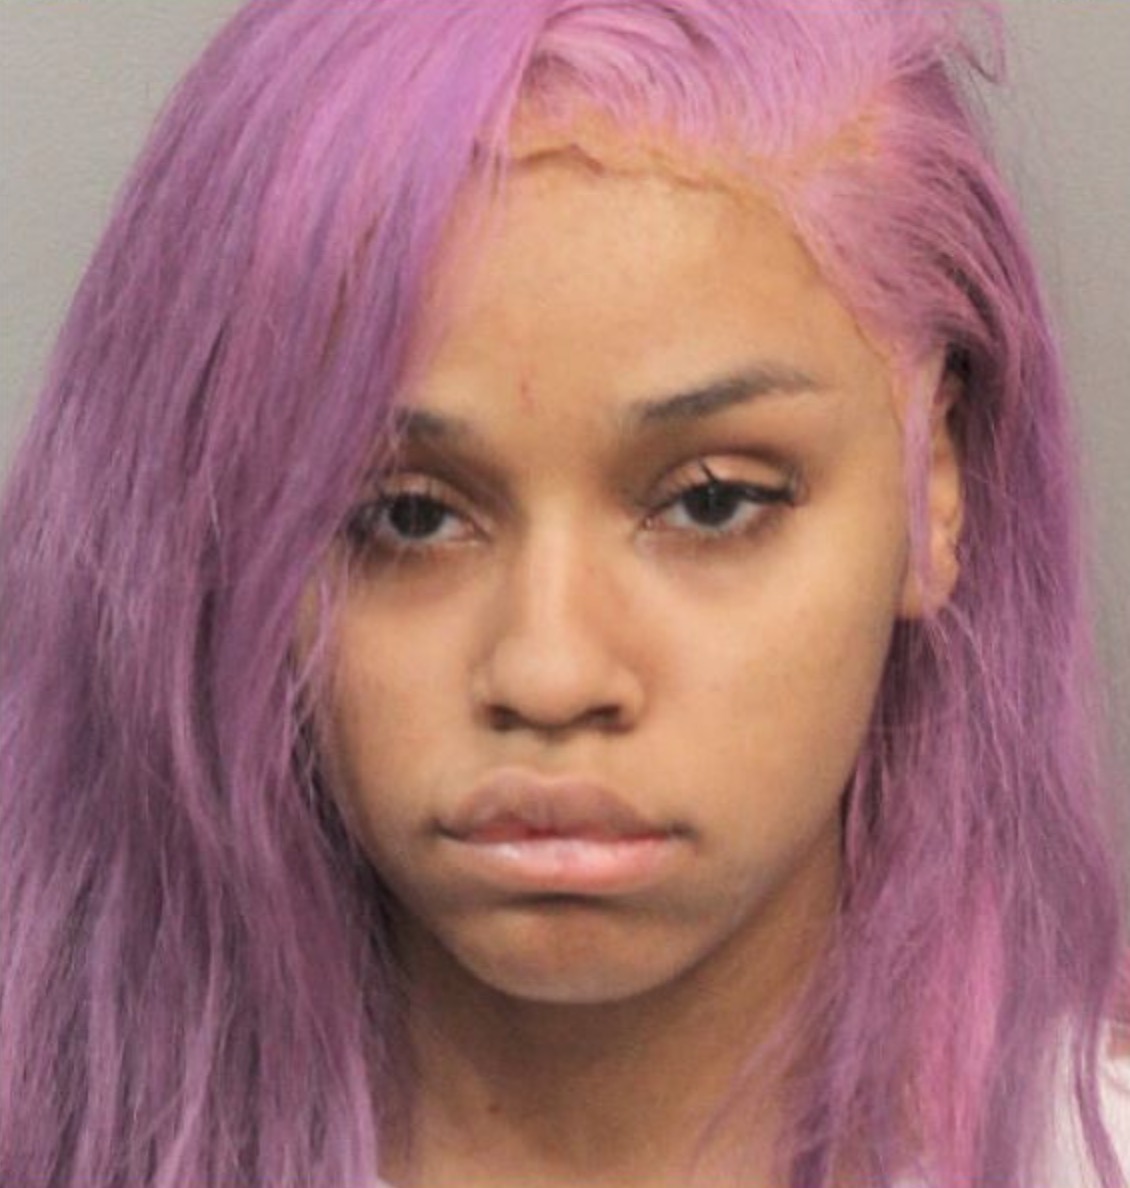 Floyd Mayweather’s daughter accused of stabbing woman near Cypress